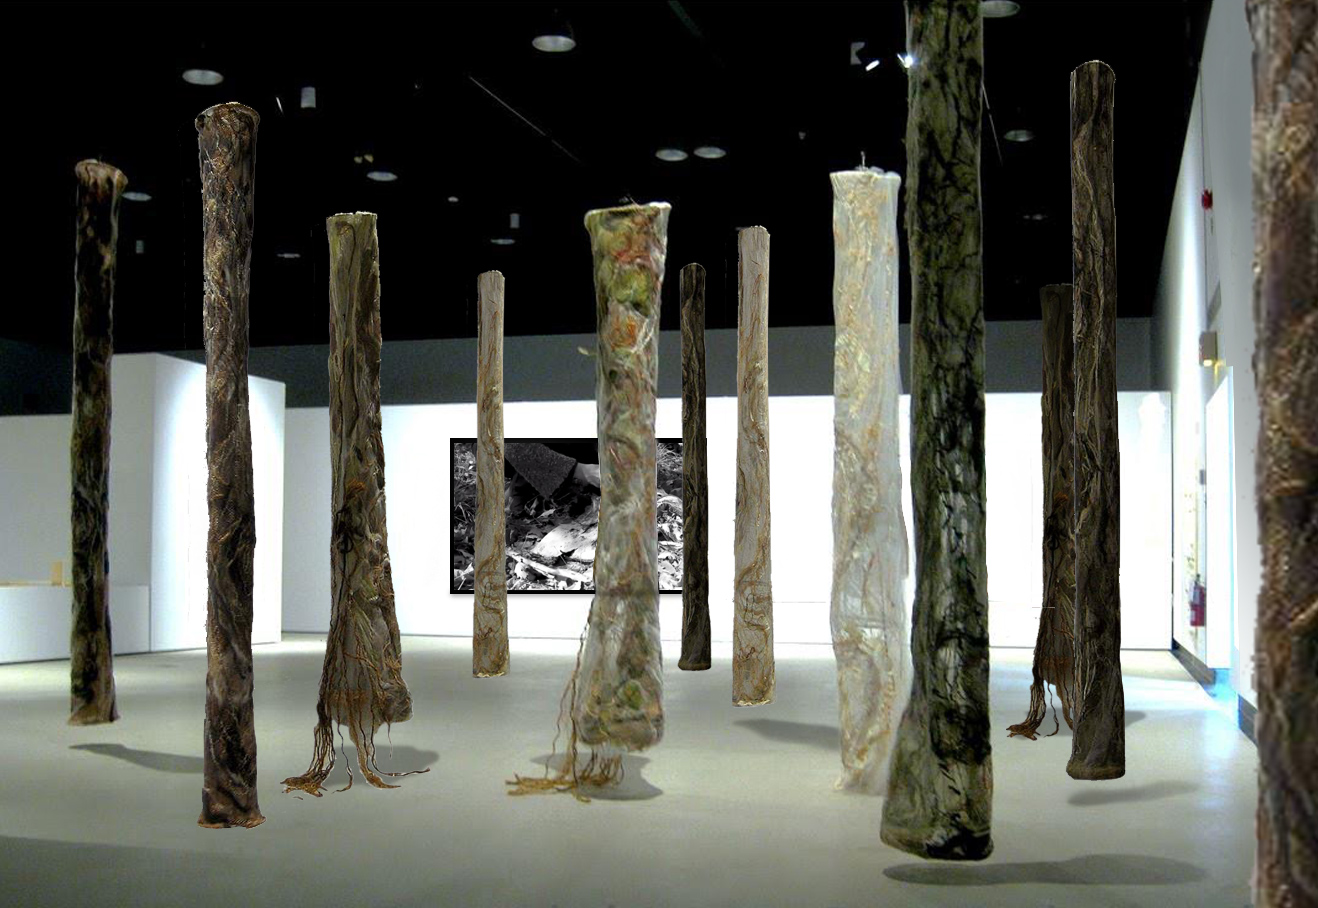 Ghost Forest and Passage exhibition to be presented at TheMuseum (Kitchener, Ontario) and Musee D’Art-Rouyn Noranda 2024 (Quebec)